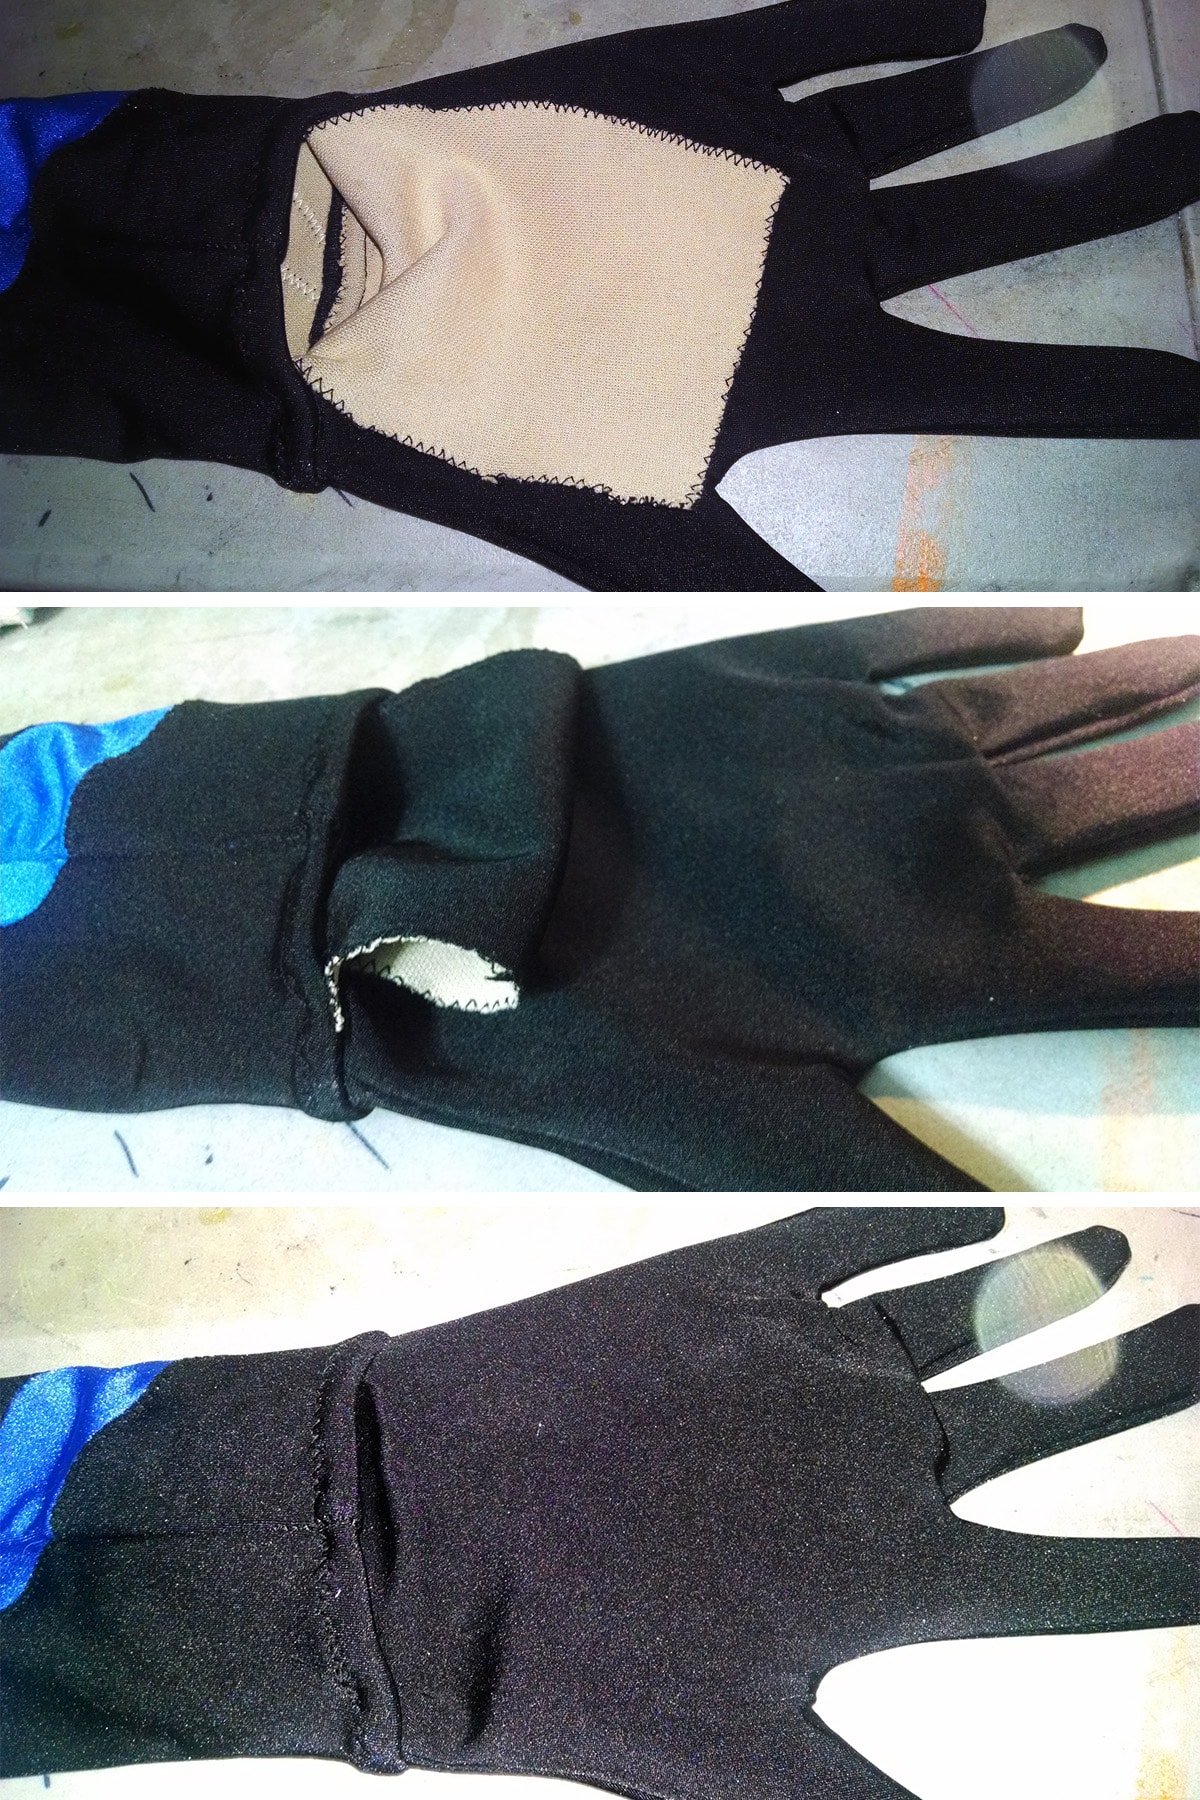 A 3 part image showing a black pair of gloves with a flap being tucked into the wrist.